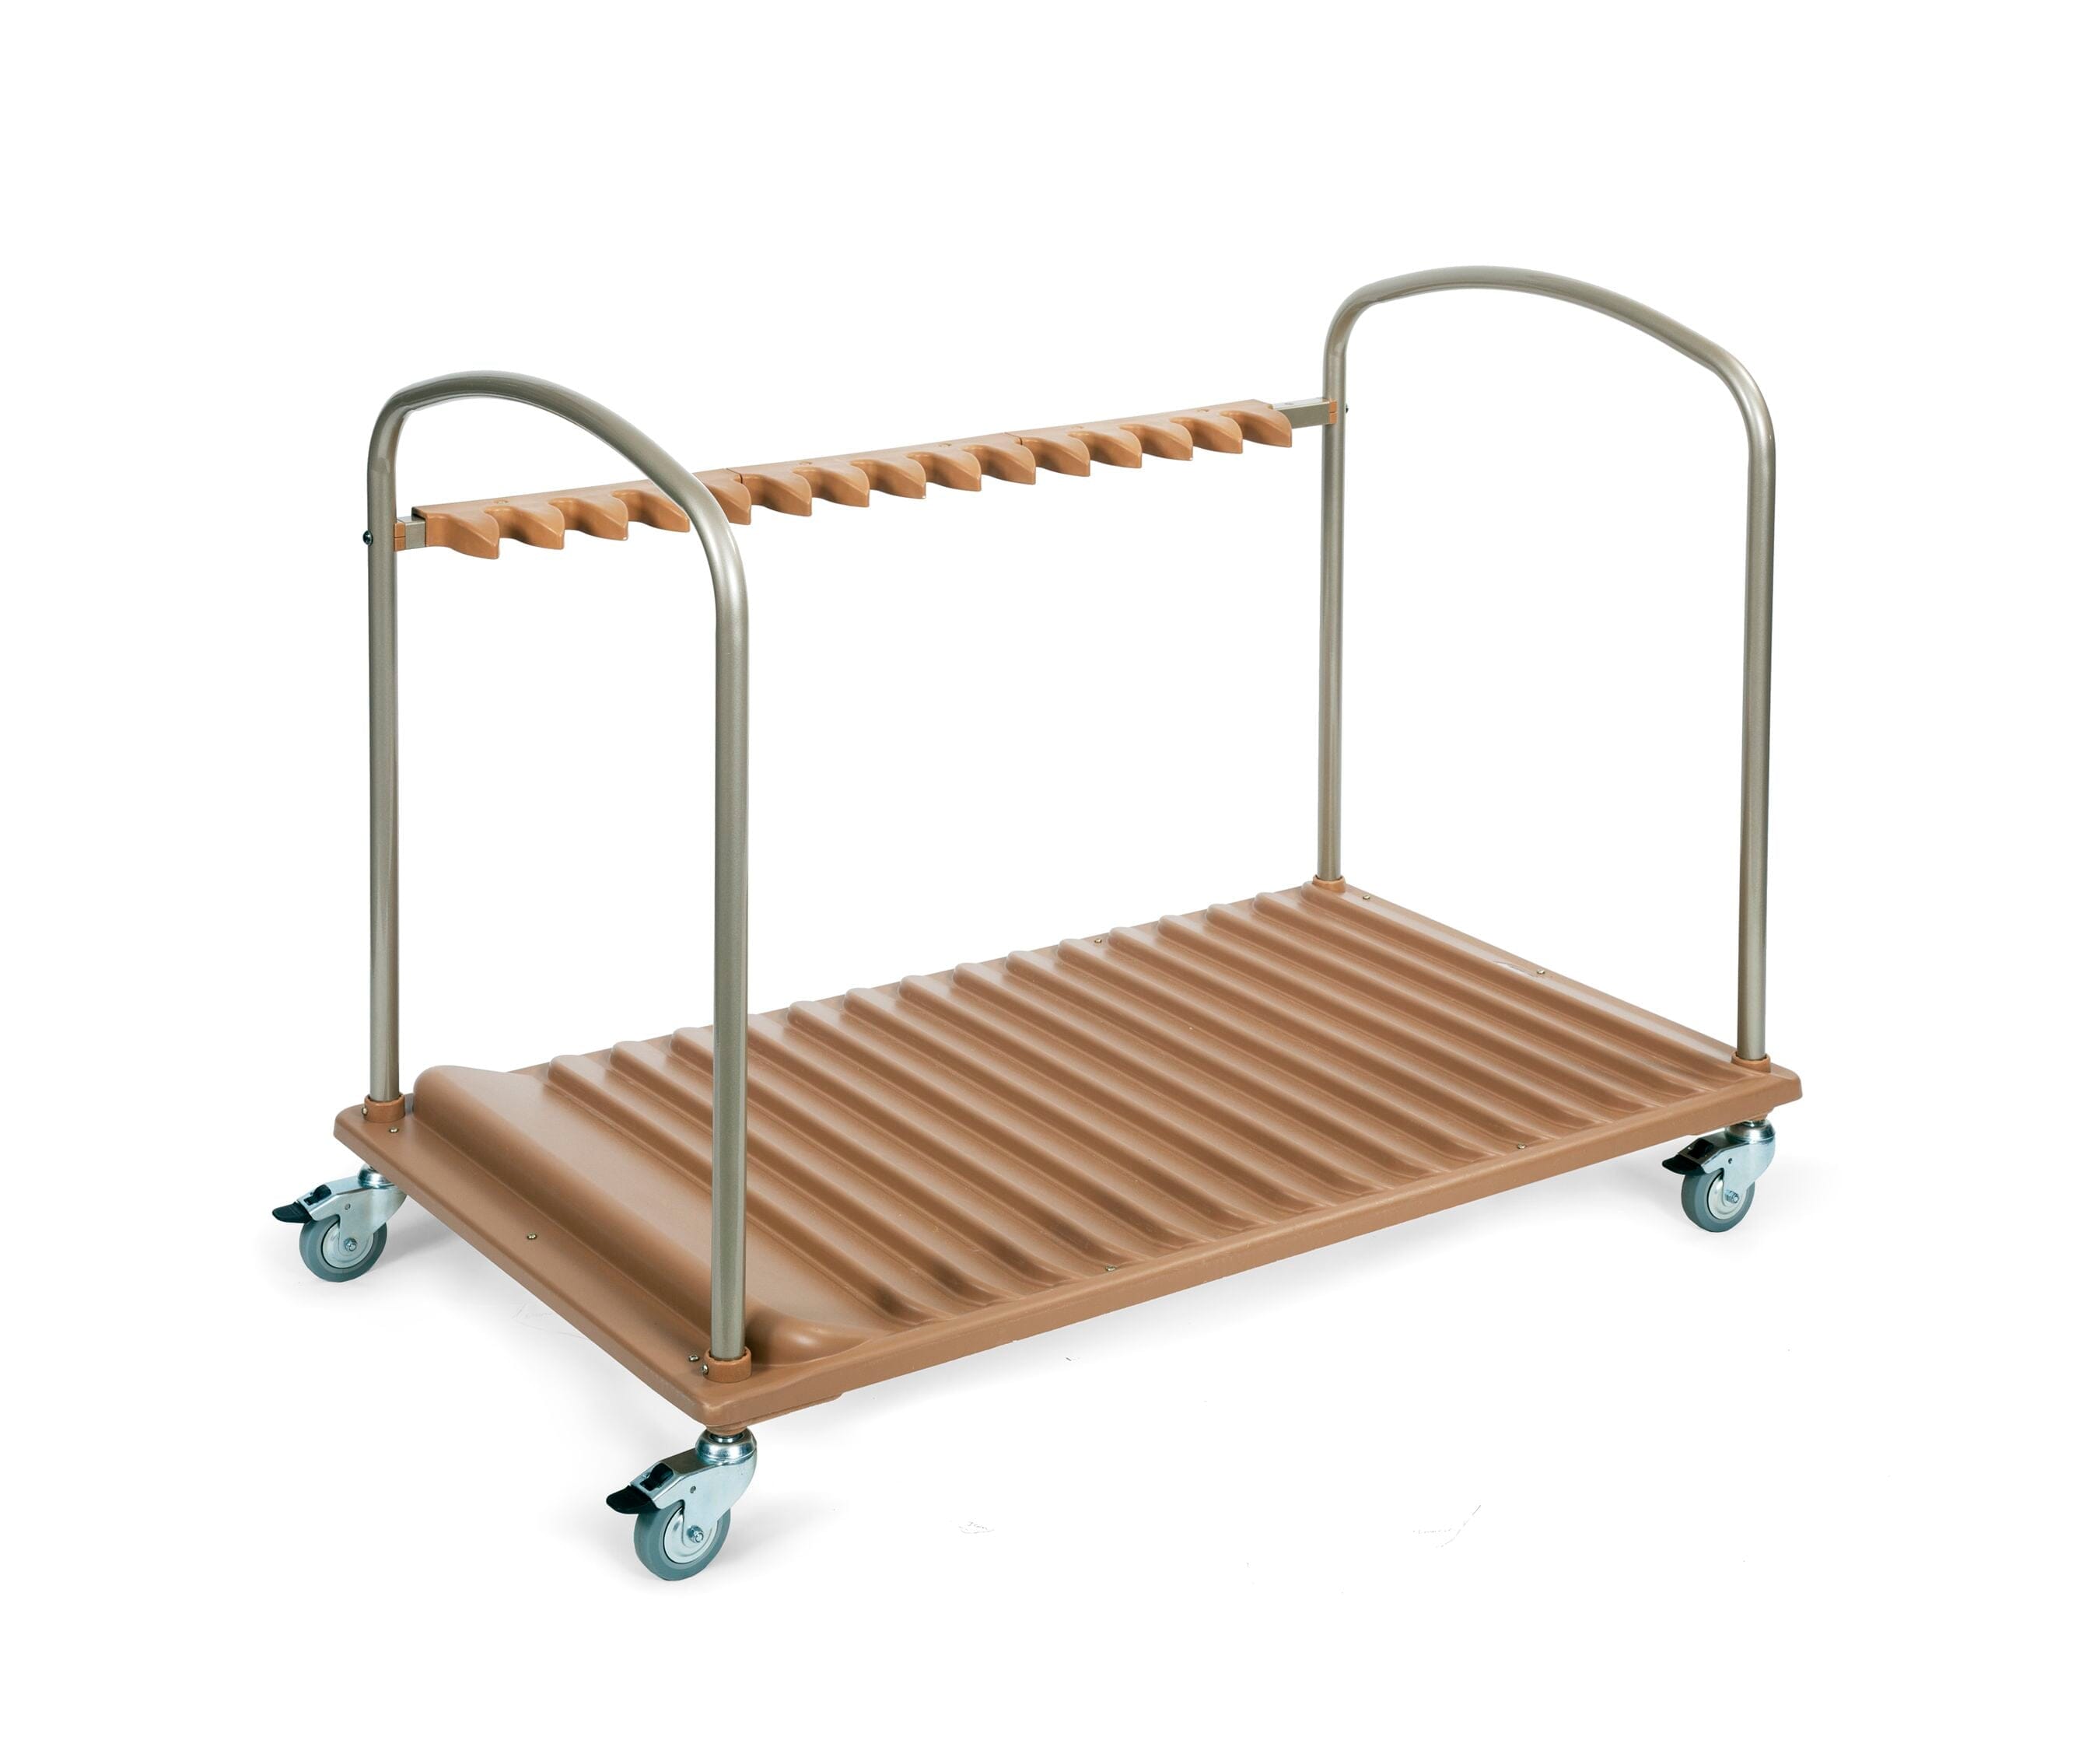 Cots and Cot Carts and Dollies, Toddler-Size from Community Playthings - louisekool